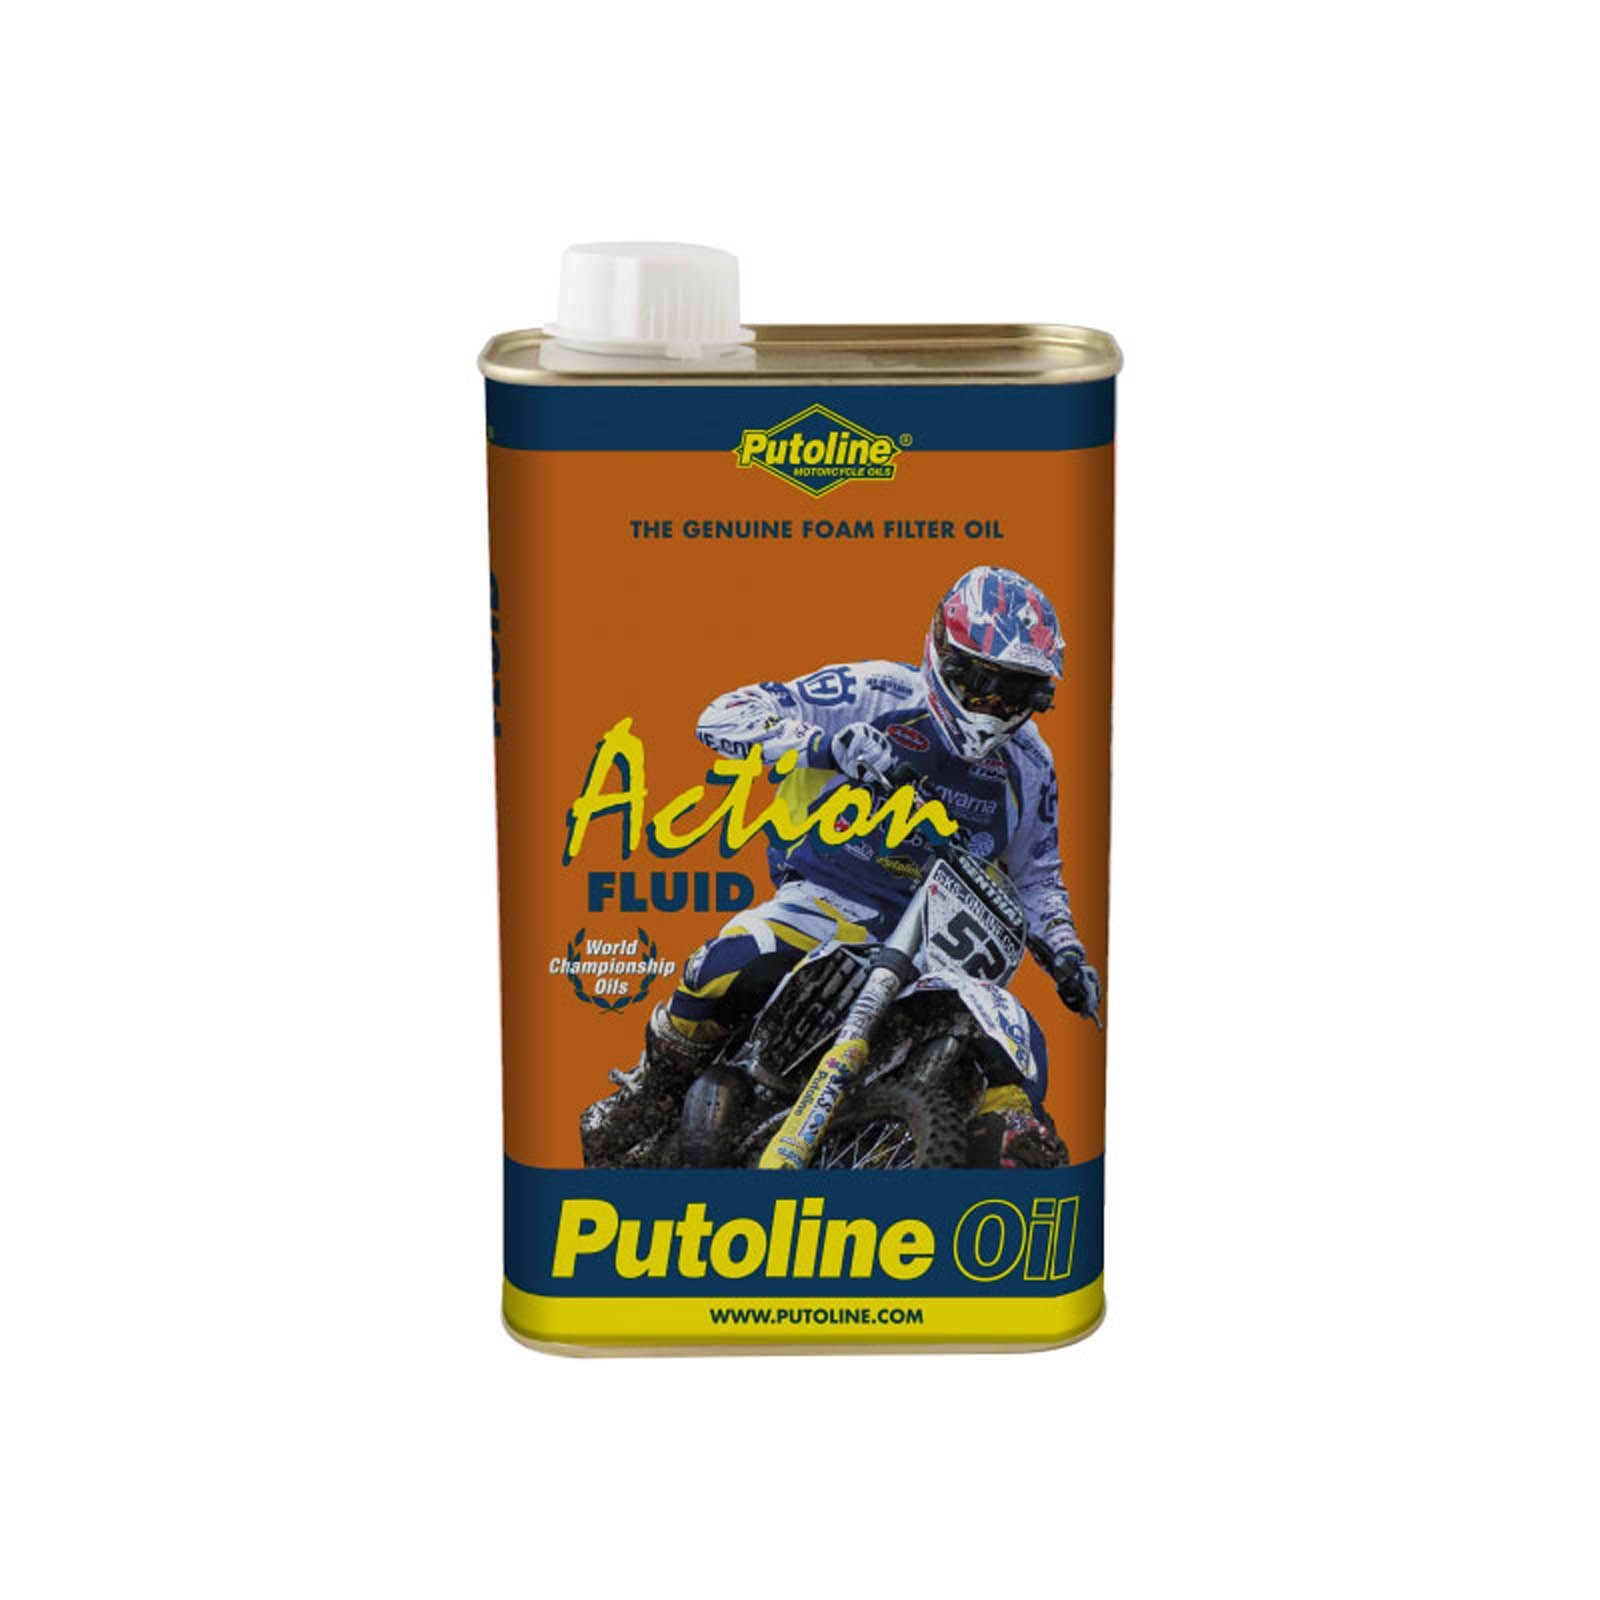 New PUTOLINE Action Air Filter Oil - 1L #PTAAFO1L